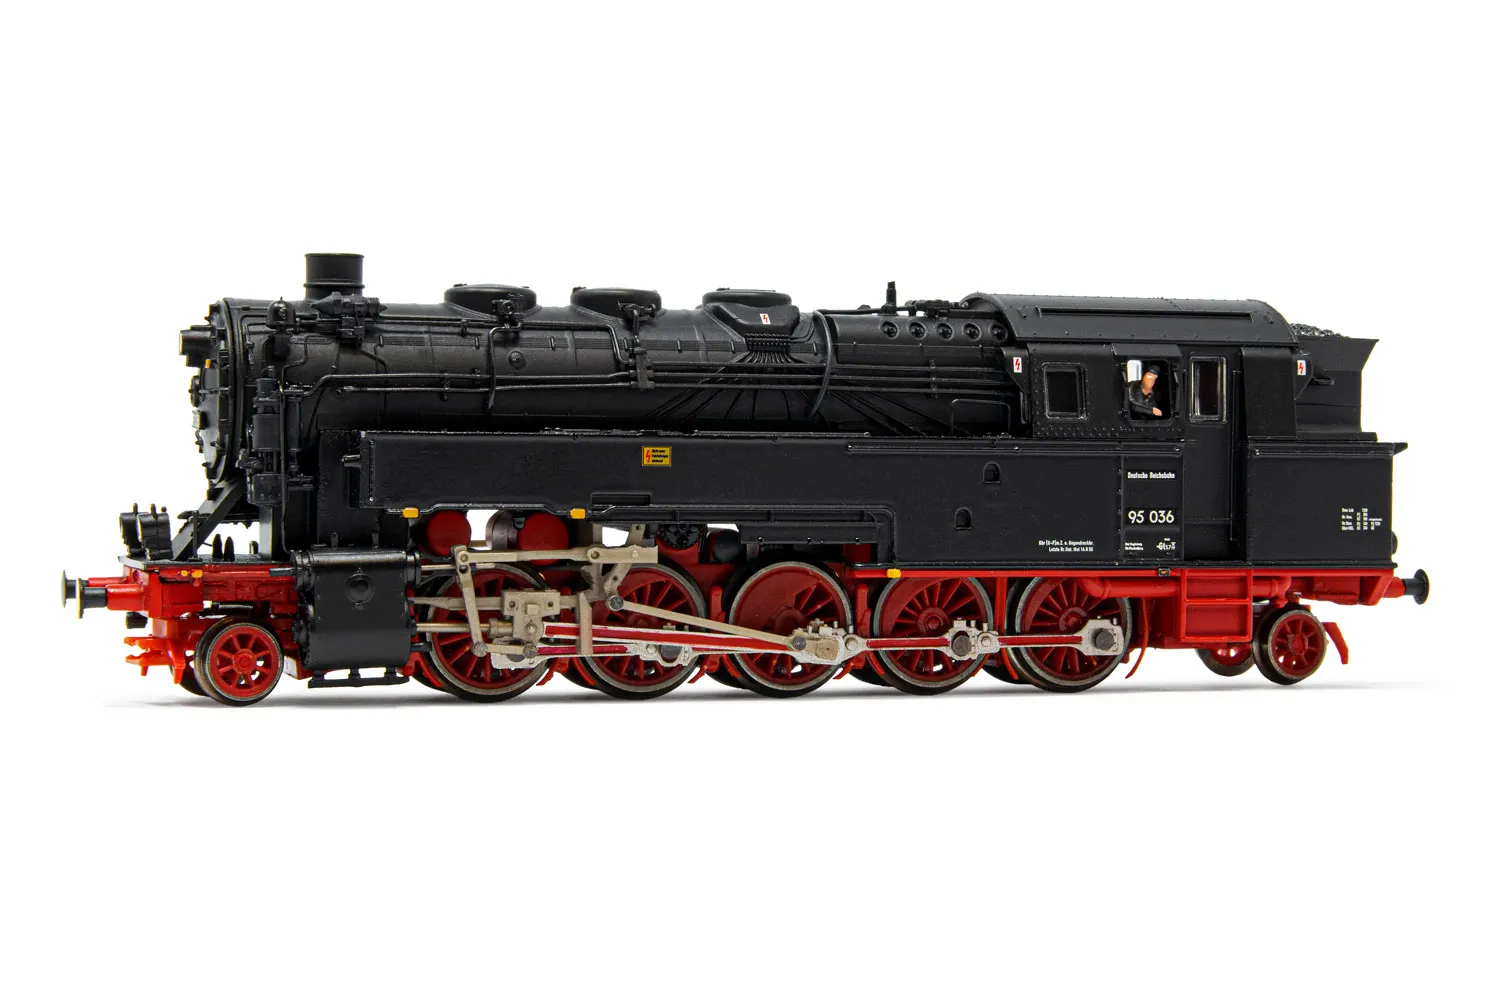 DR, steam locomotive class 95 036, coal fired, red/black livery, period III